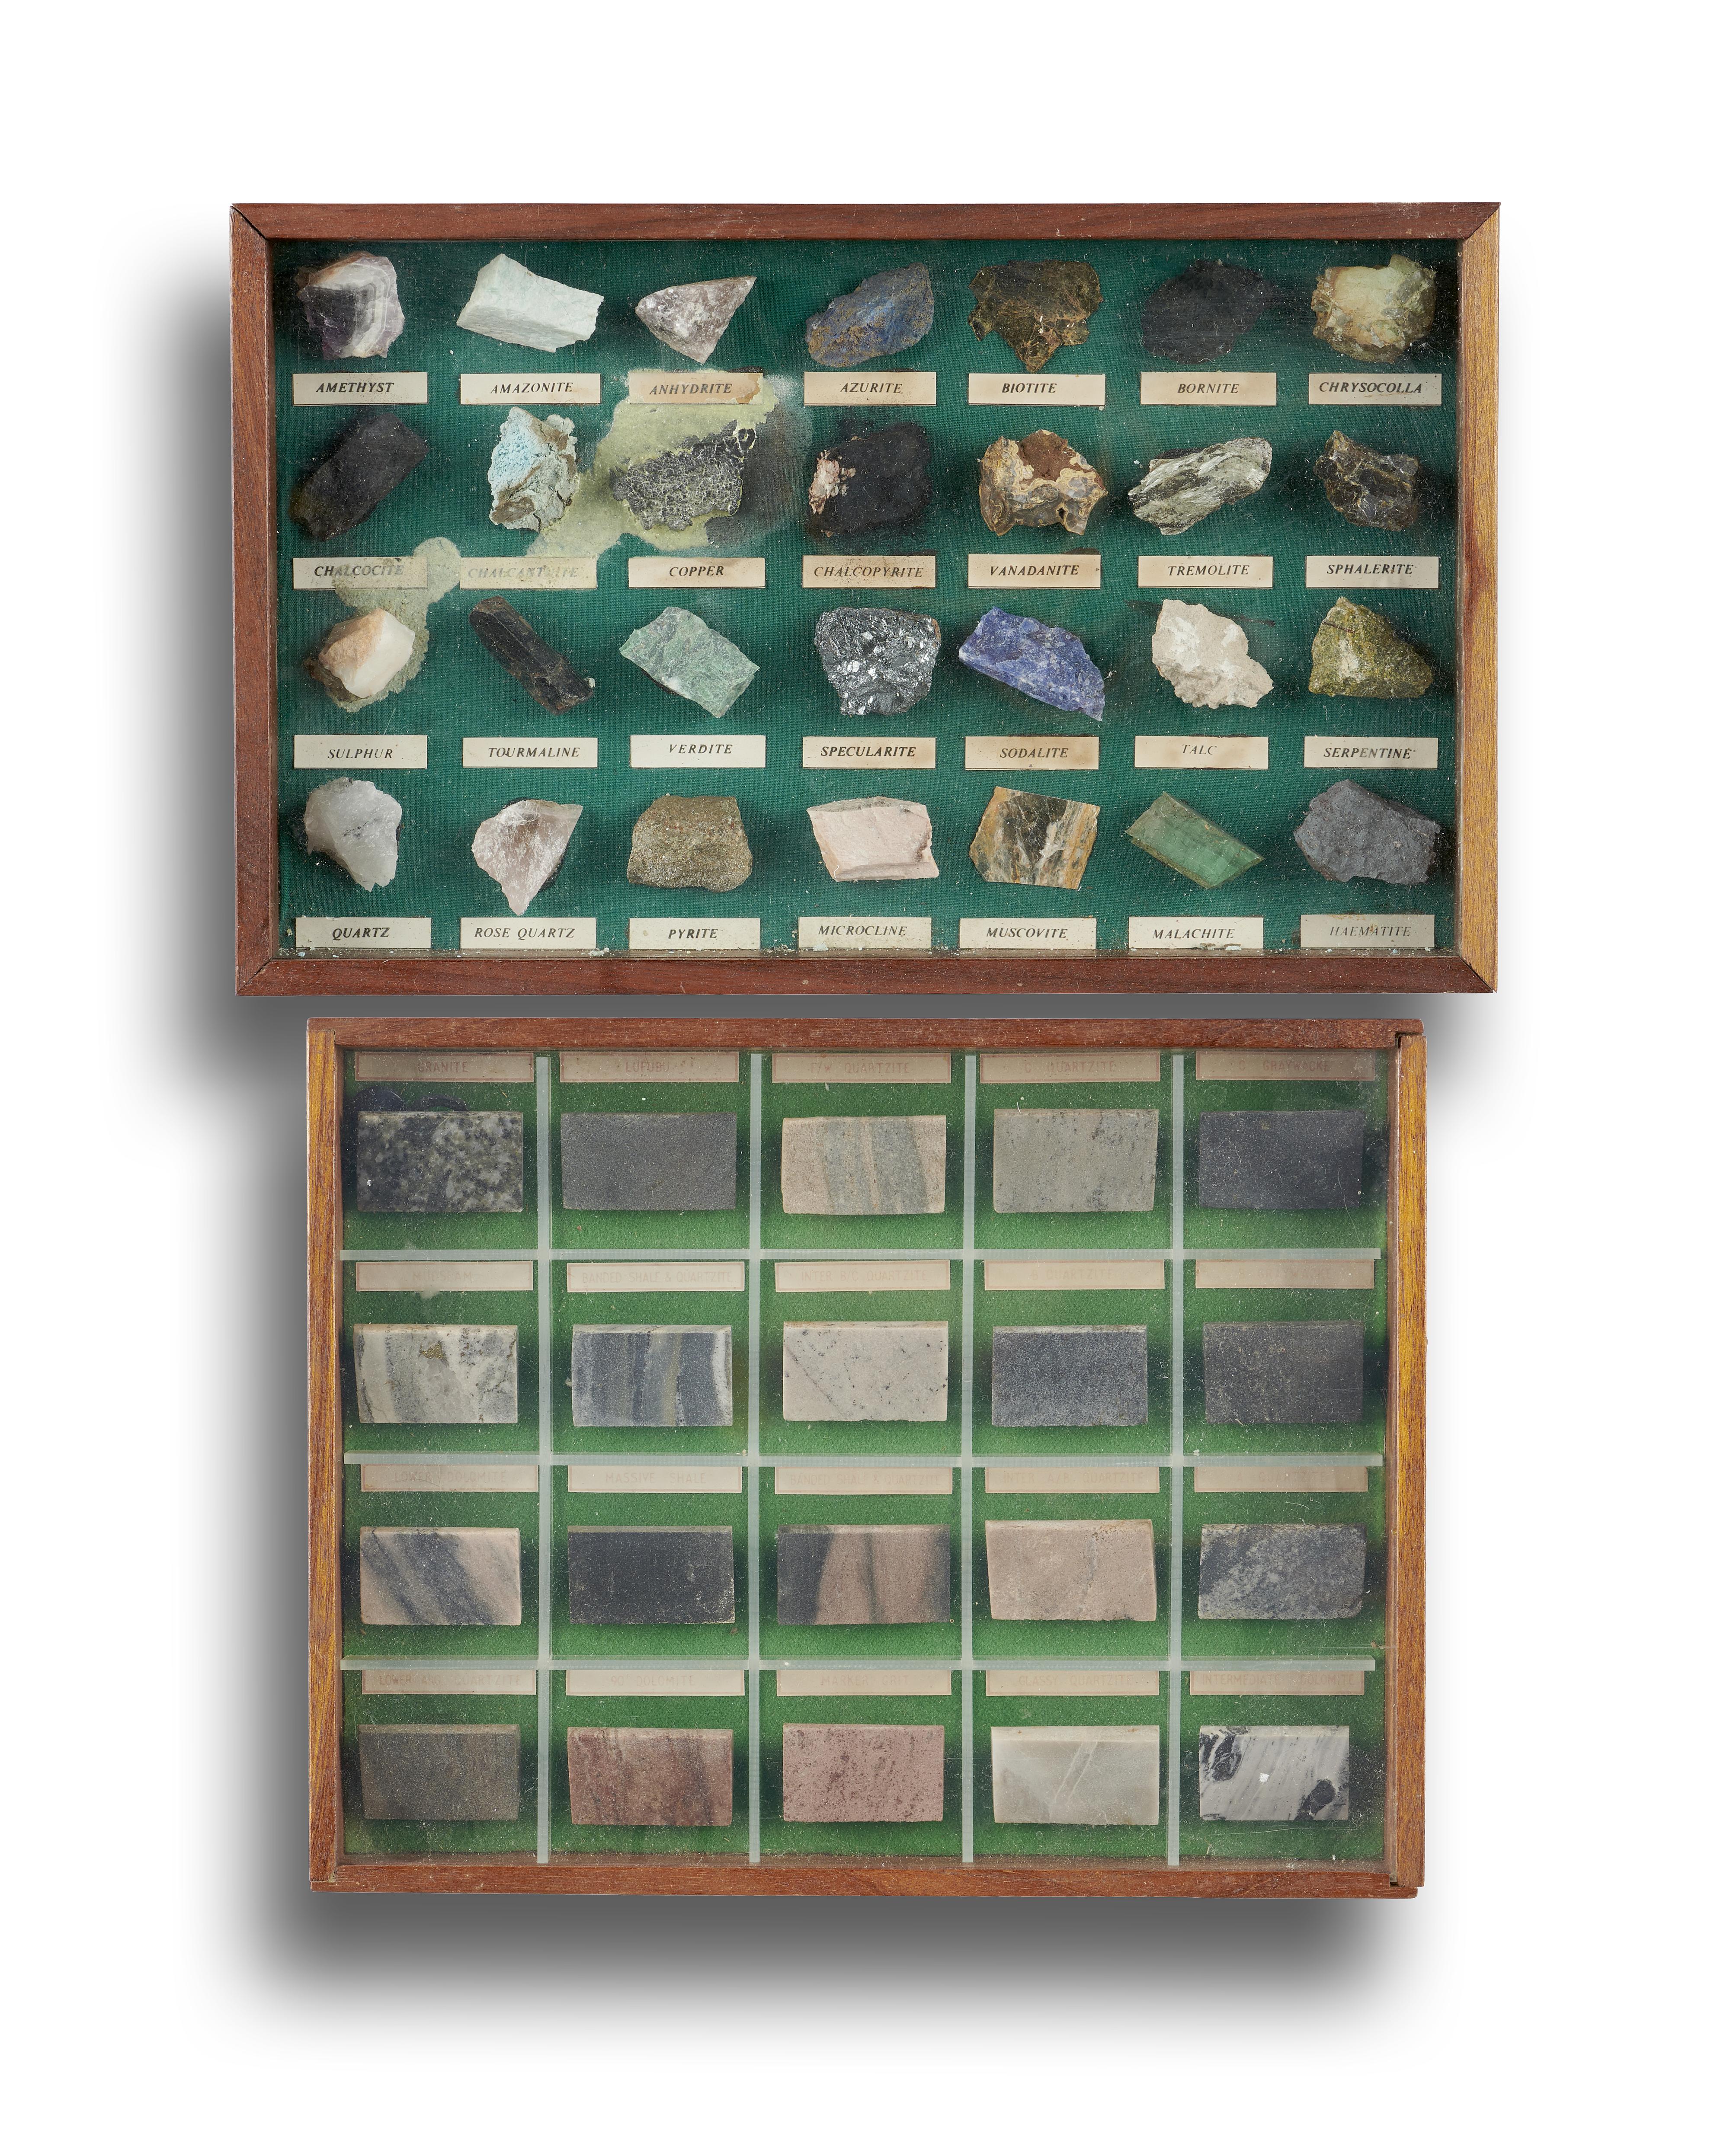 A geological collection mid 20th century housed in two display boxes